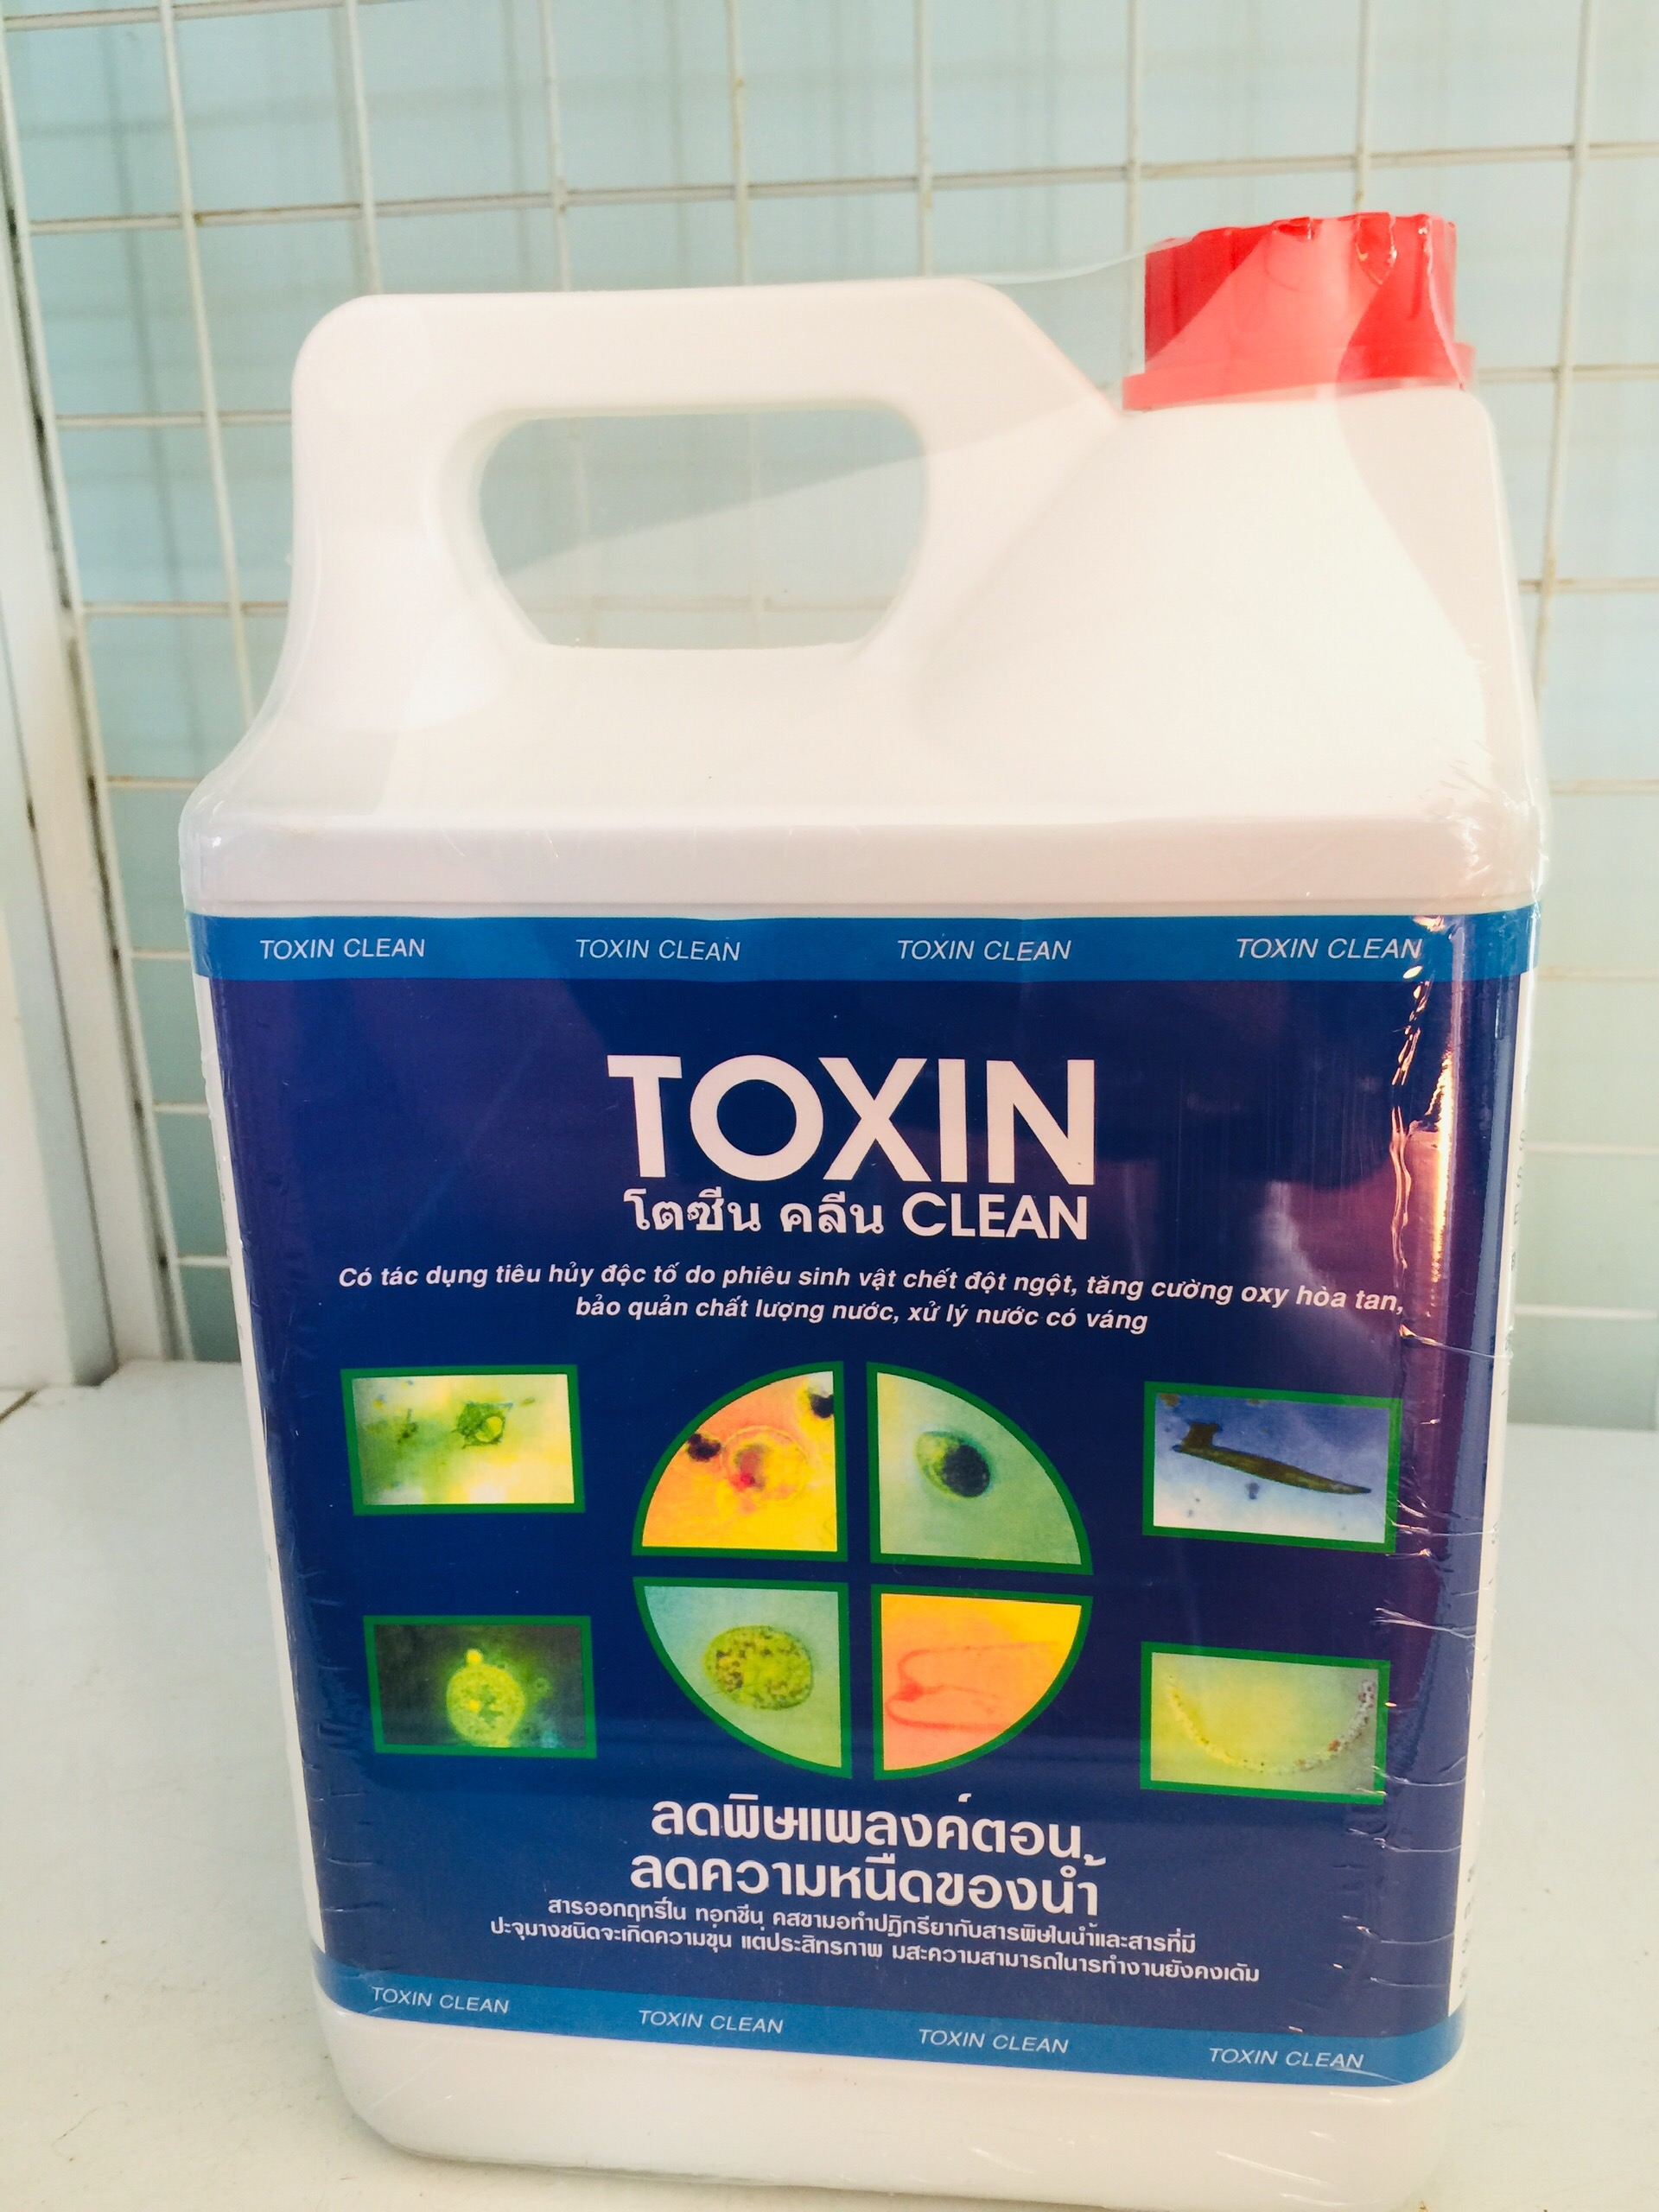 TOXIN CLEAN